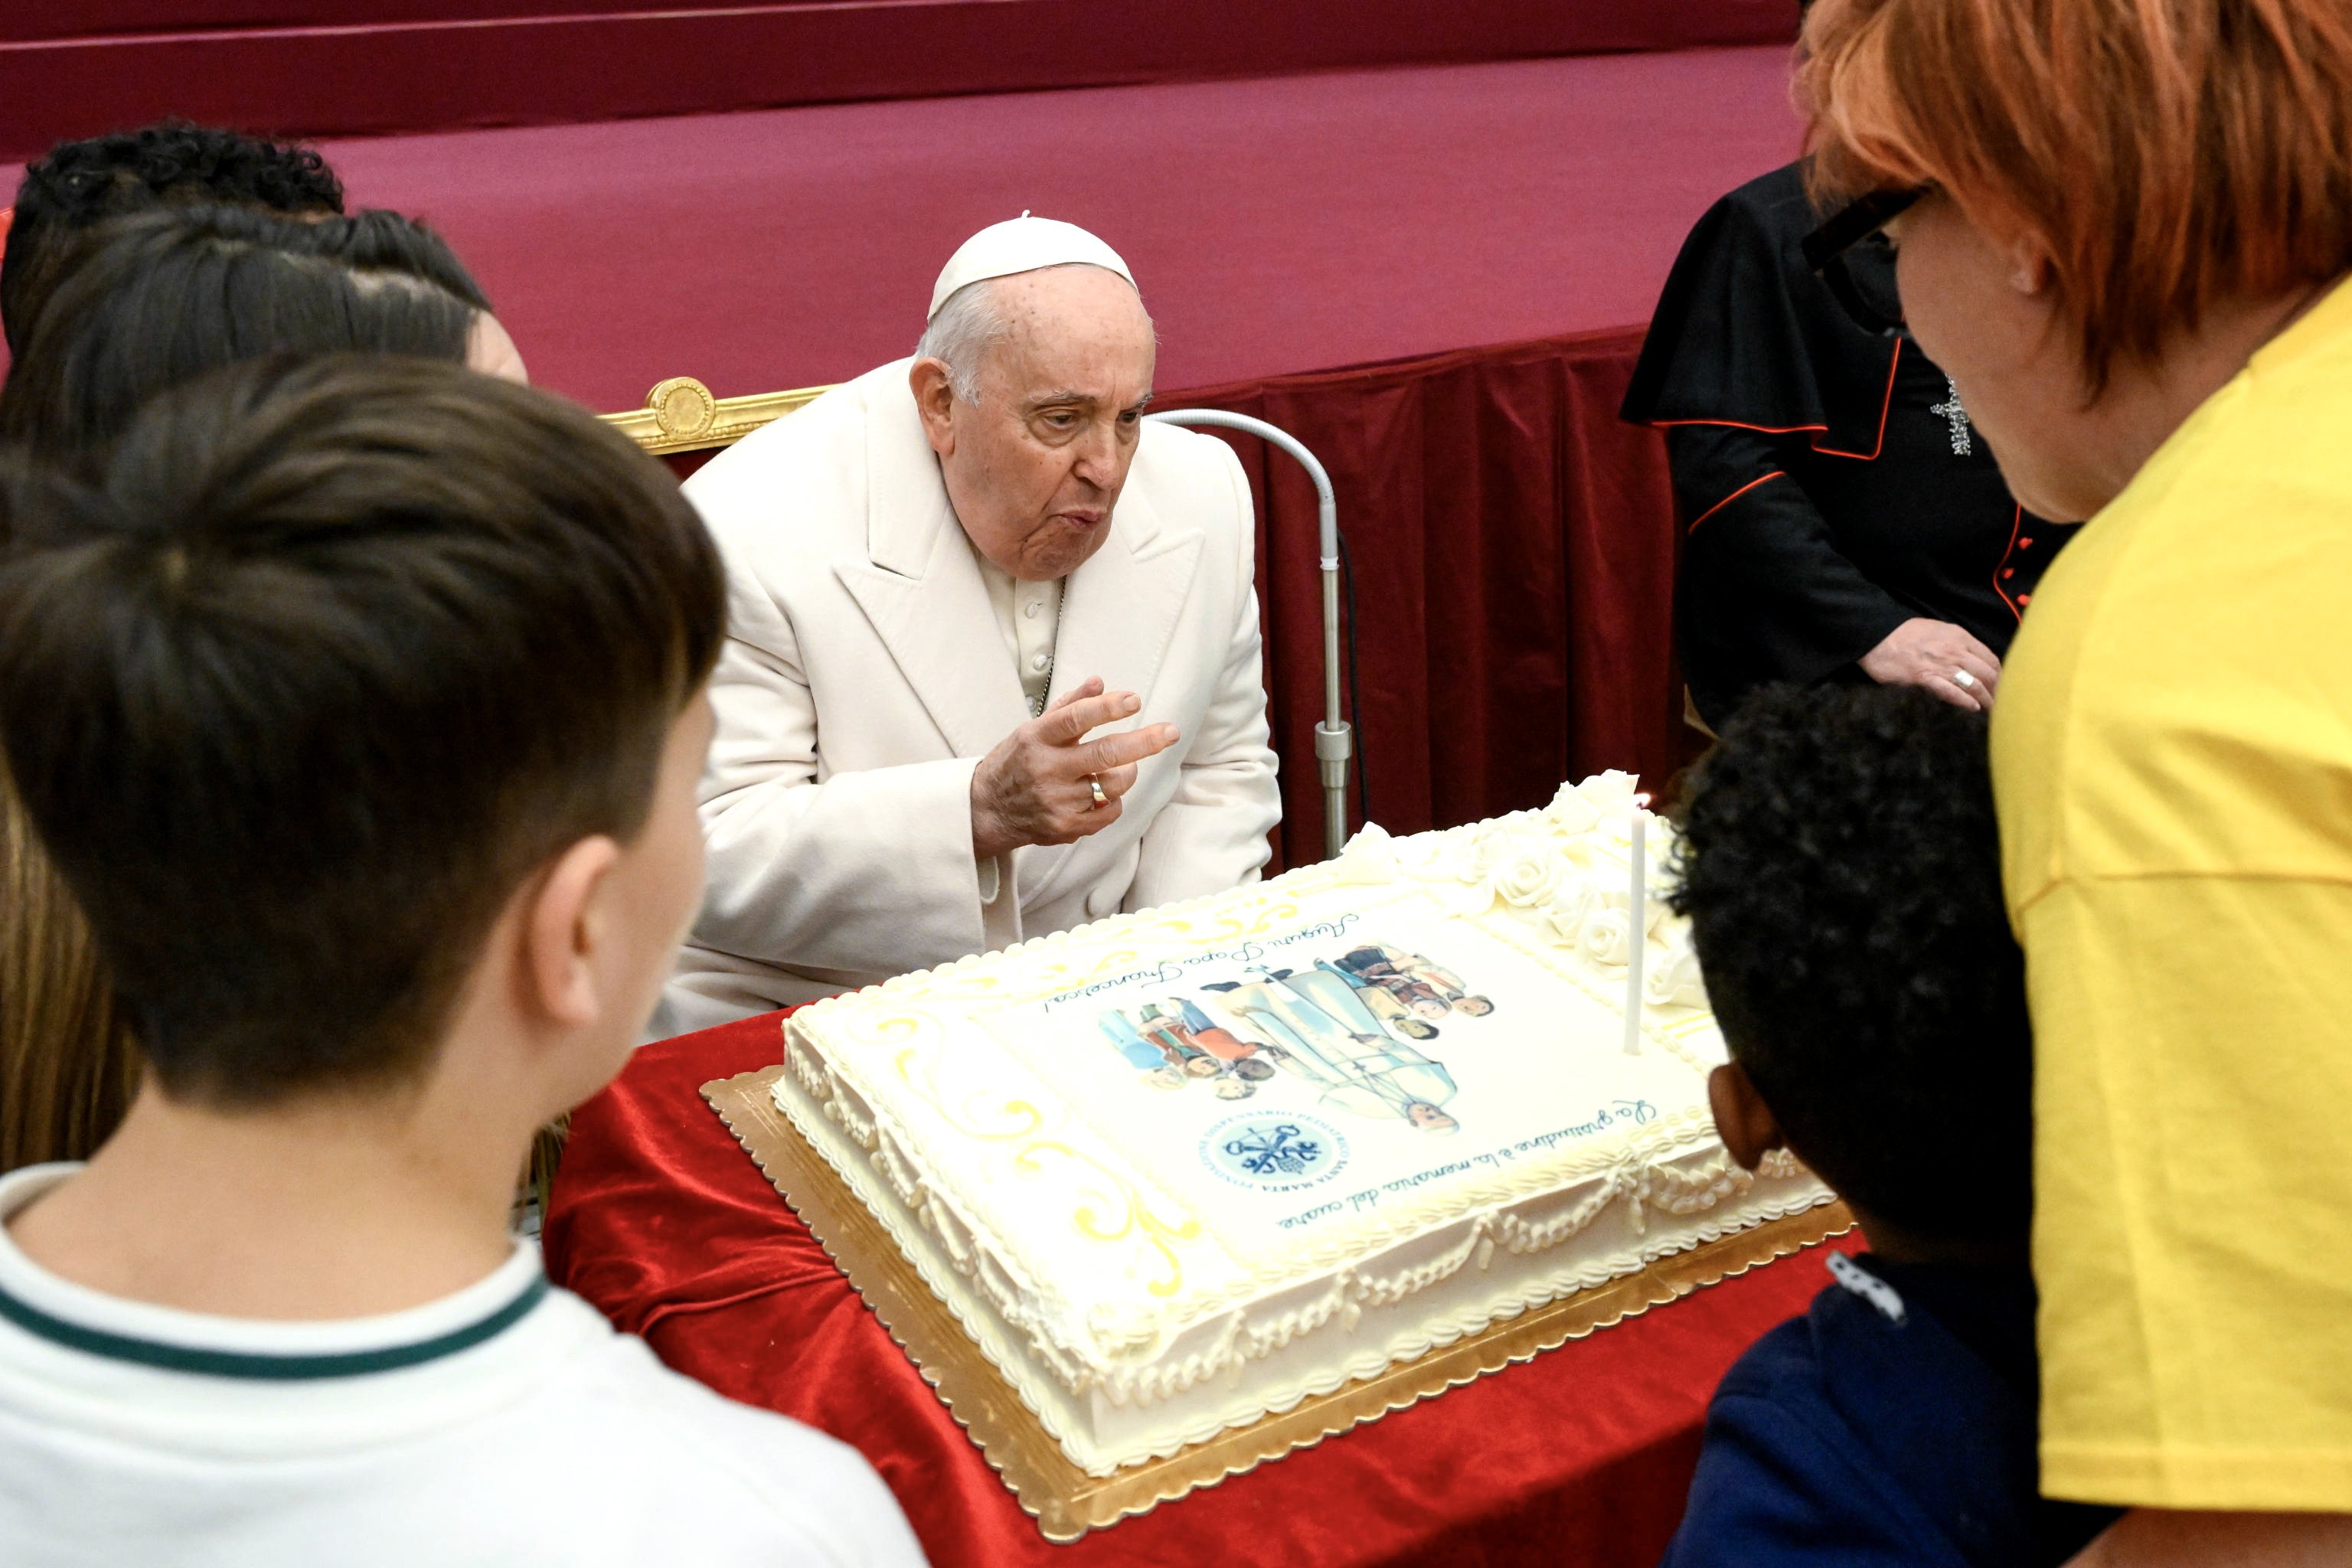 Pope Francis is presented with a birthday cake during an audience with the children of Santa Marta Paediatric Dispensary at the Vatican, Rome on Sunday. Photo: EPA-EFE / Vatican Media Handout 